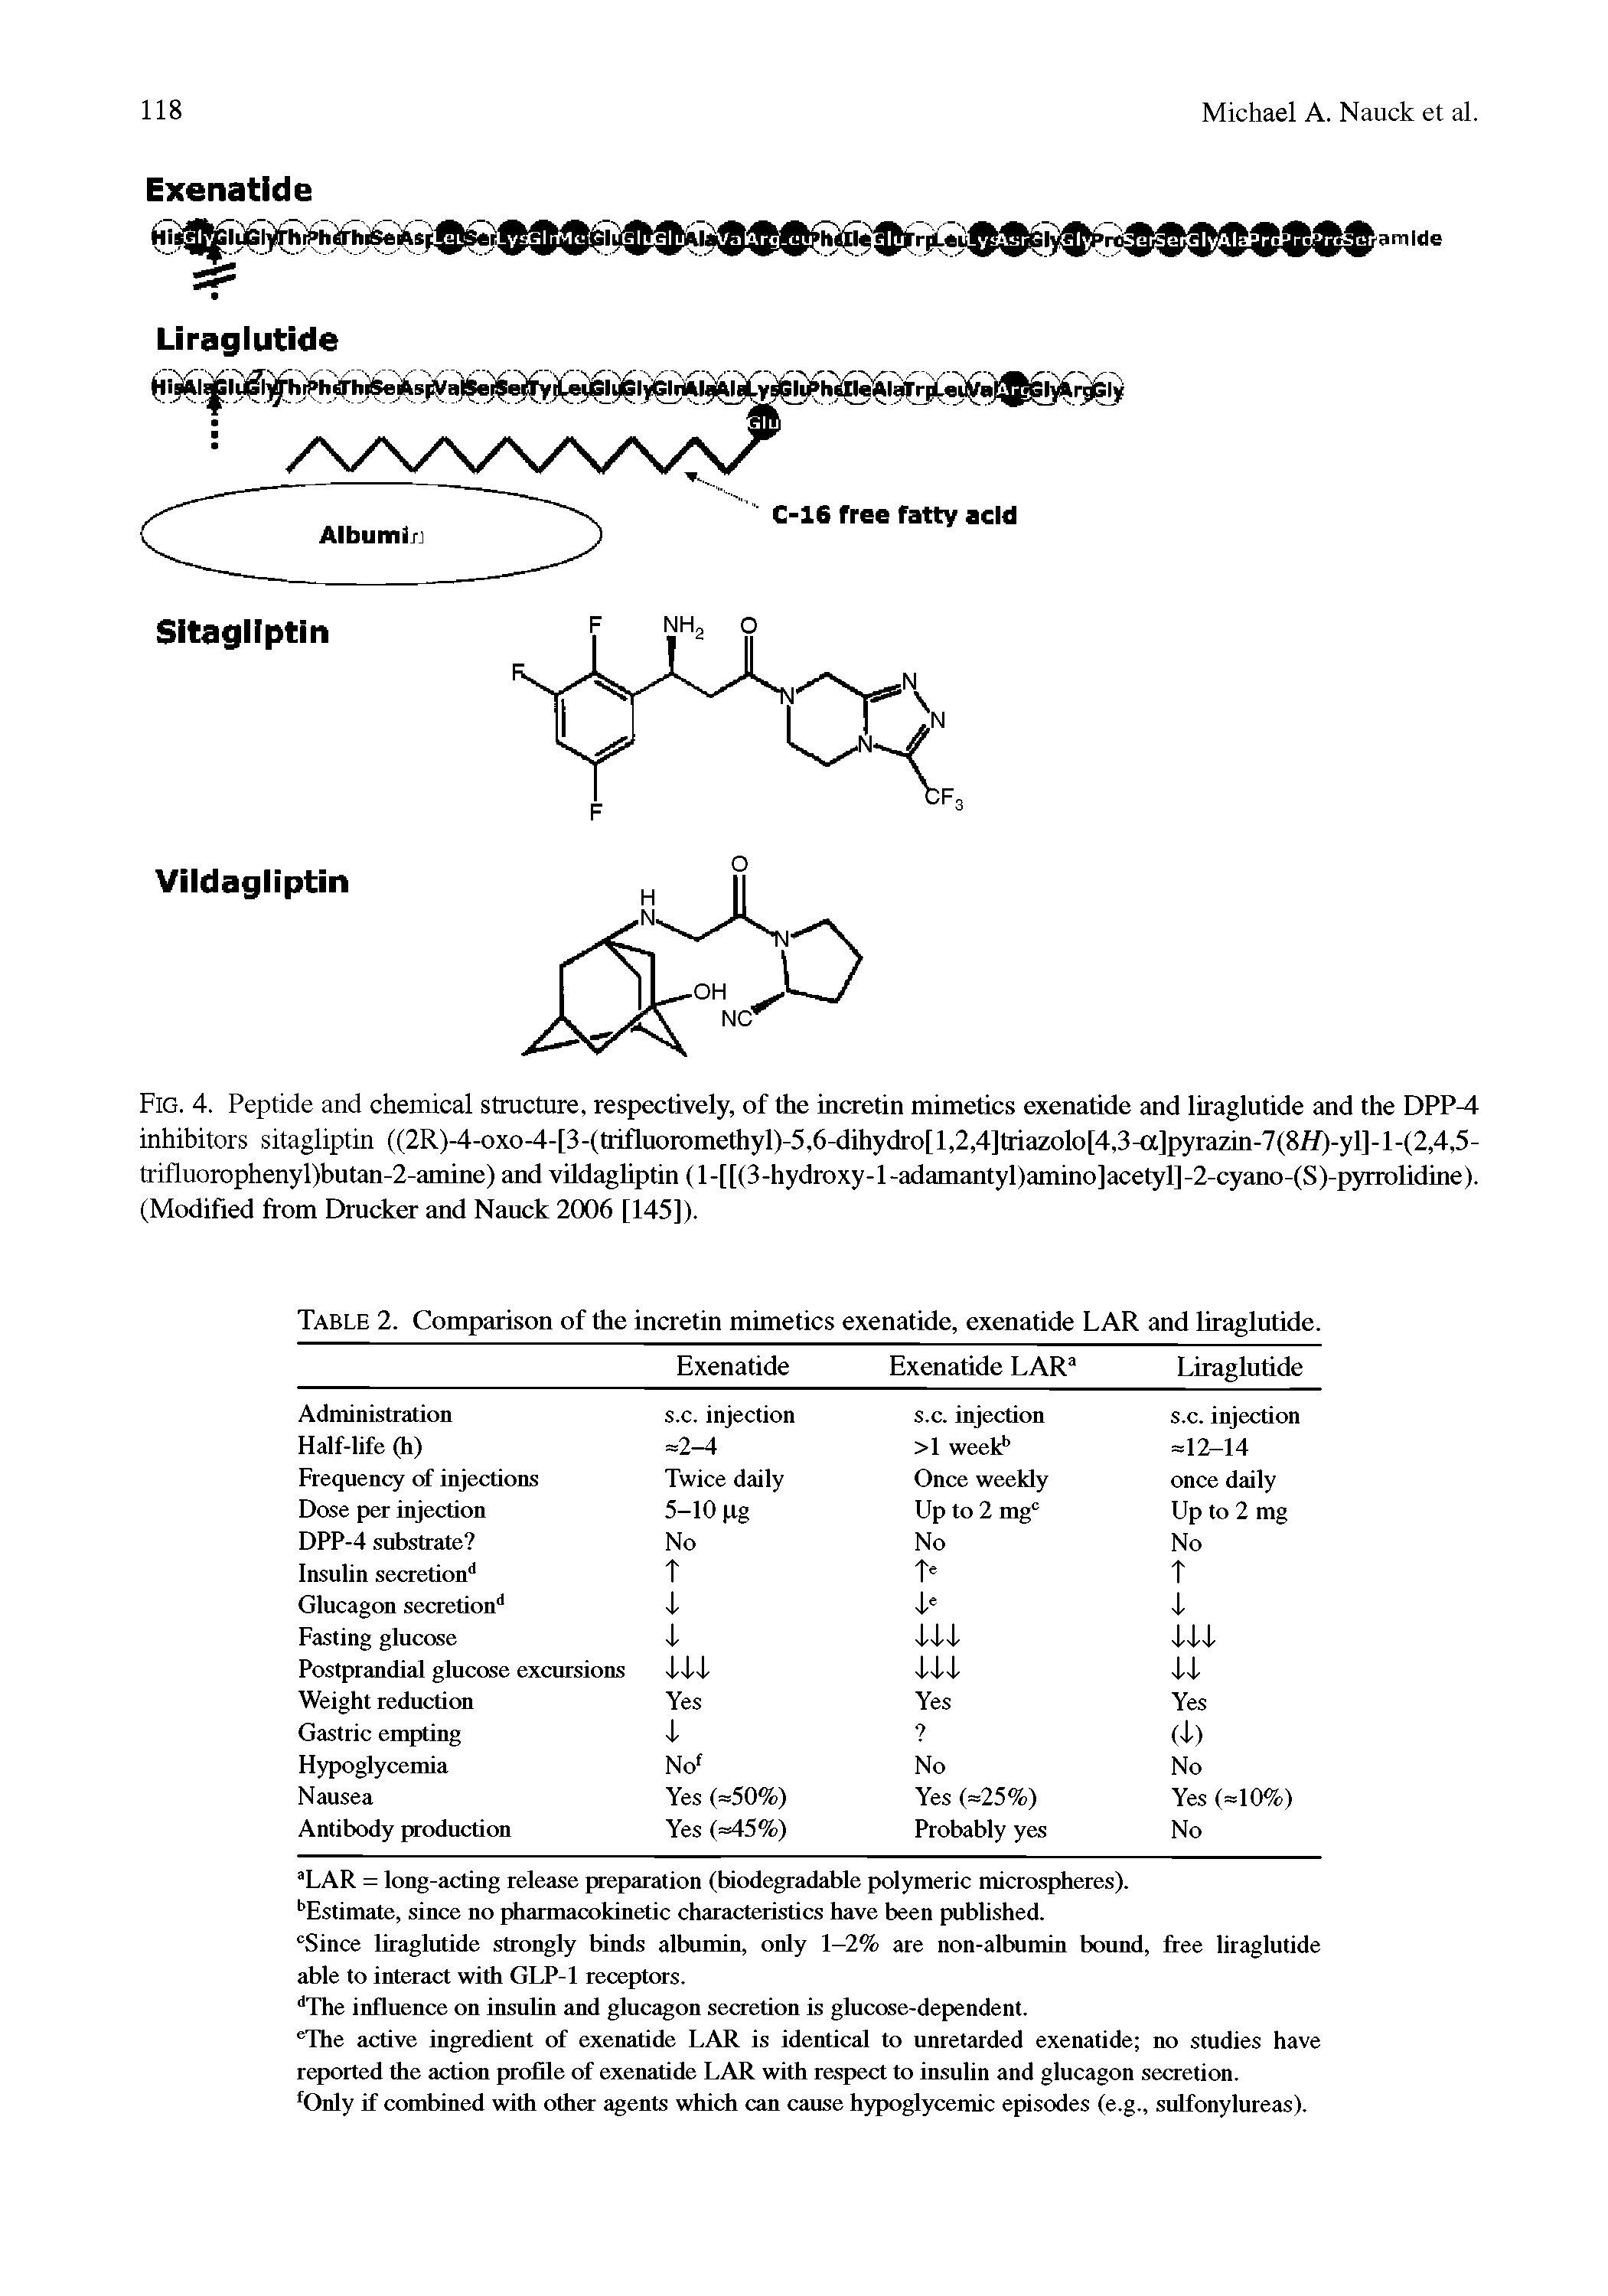 Fig. 4. Peptide and chemical structure, respectively, of the incretin mimetics exenatide and liraglutide and the DPP inhibitors sitagliptin ((2R)A-oxo-4-[3-(trifluoromethyl)-5,6-dihydro[l,2,4]triazolo[4,3-a]pyrazin-7(8//)-yl]-l-(2,4,5-trifluorophenyl)butan-2-amine) and vUdagliptin (l-[[(3-hydroxy-l-adamantyl)amino]acetyl]-2-cyano-(S)-pyrrolidine). (Modified from Drucker and Nanck 2006 [145]).